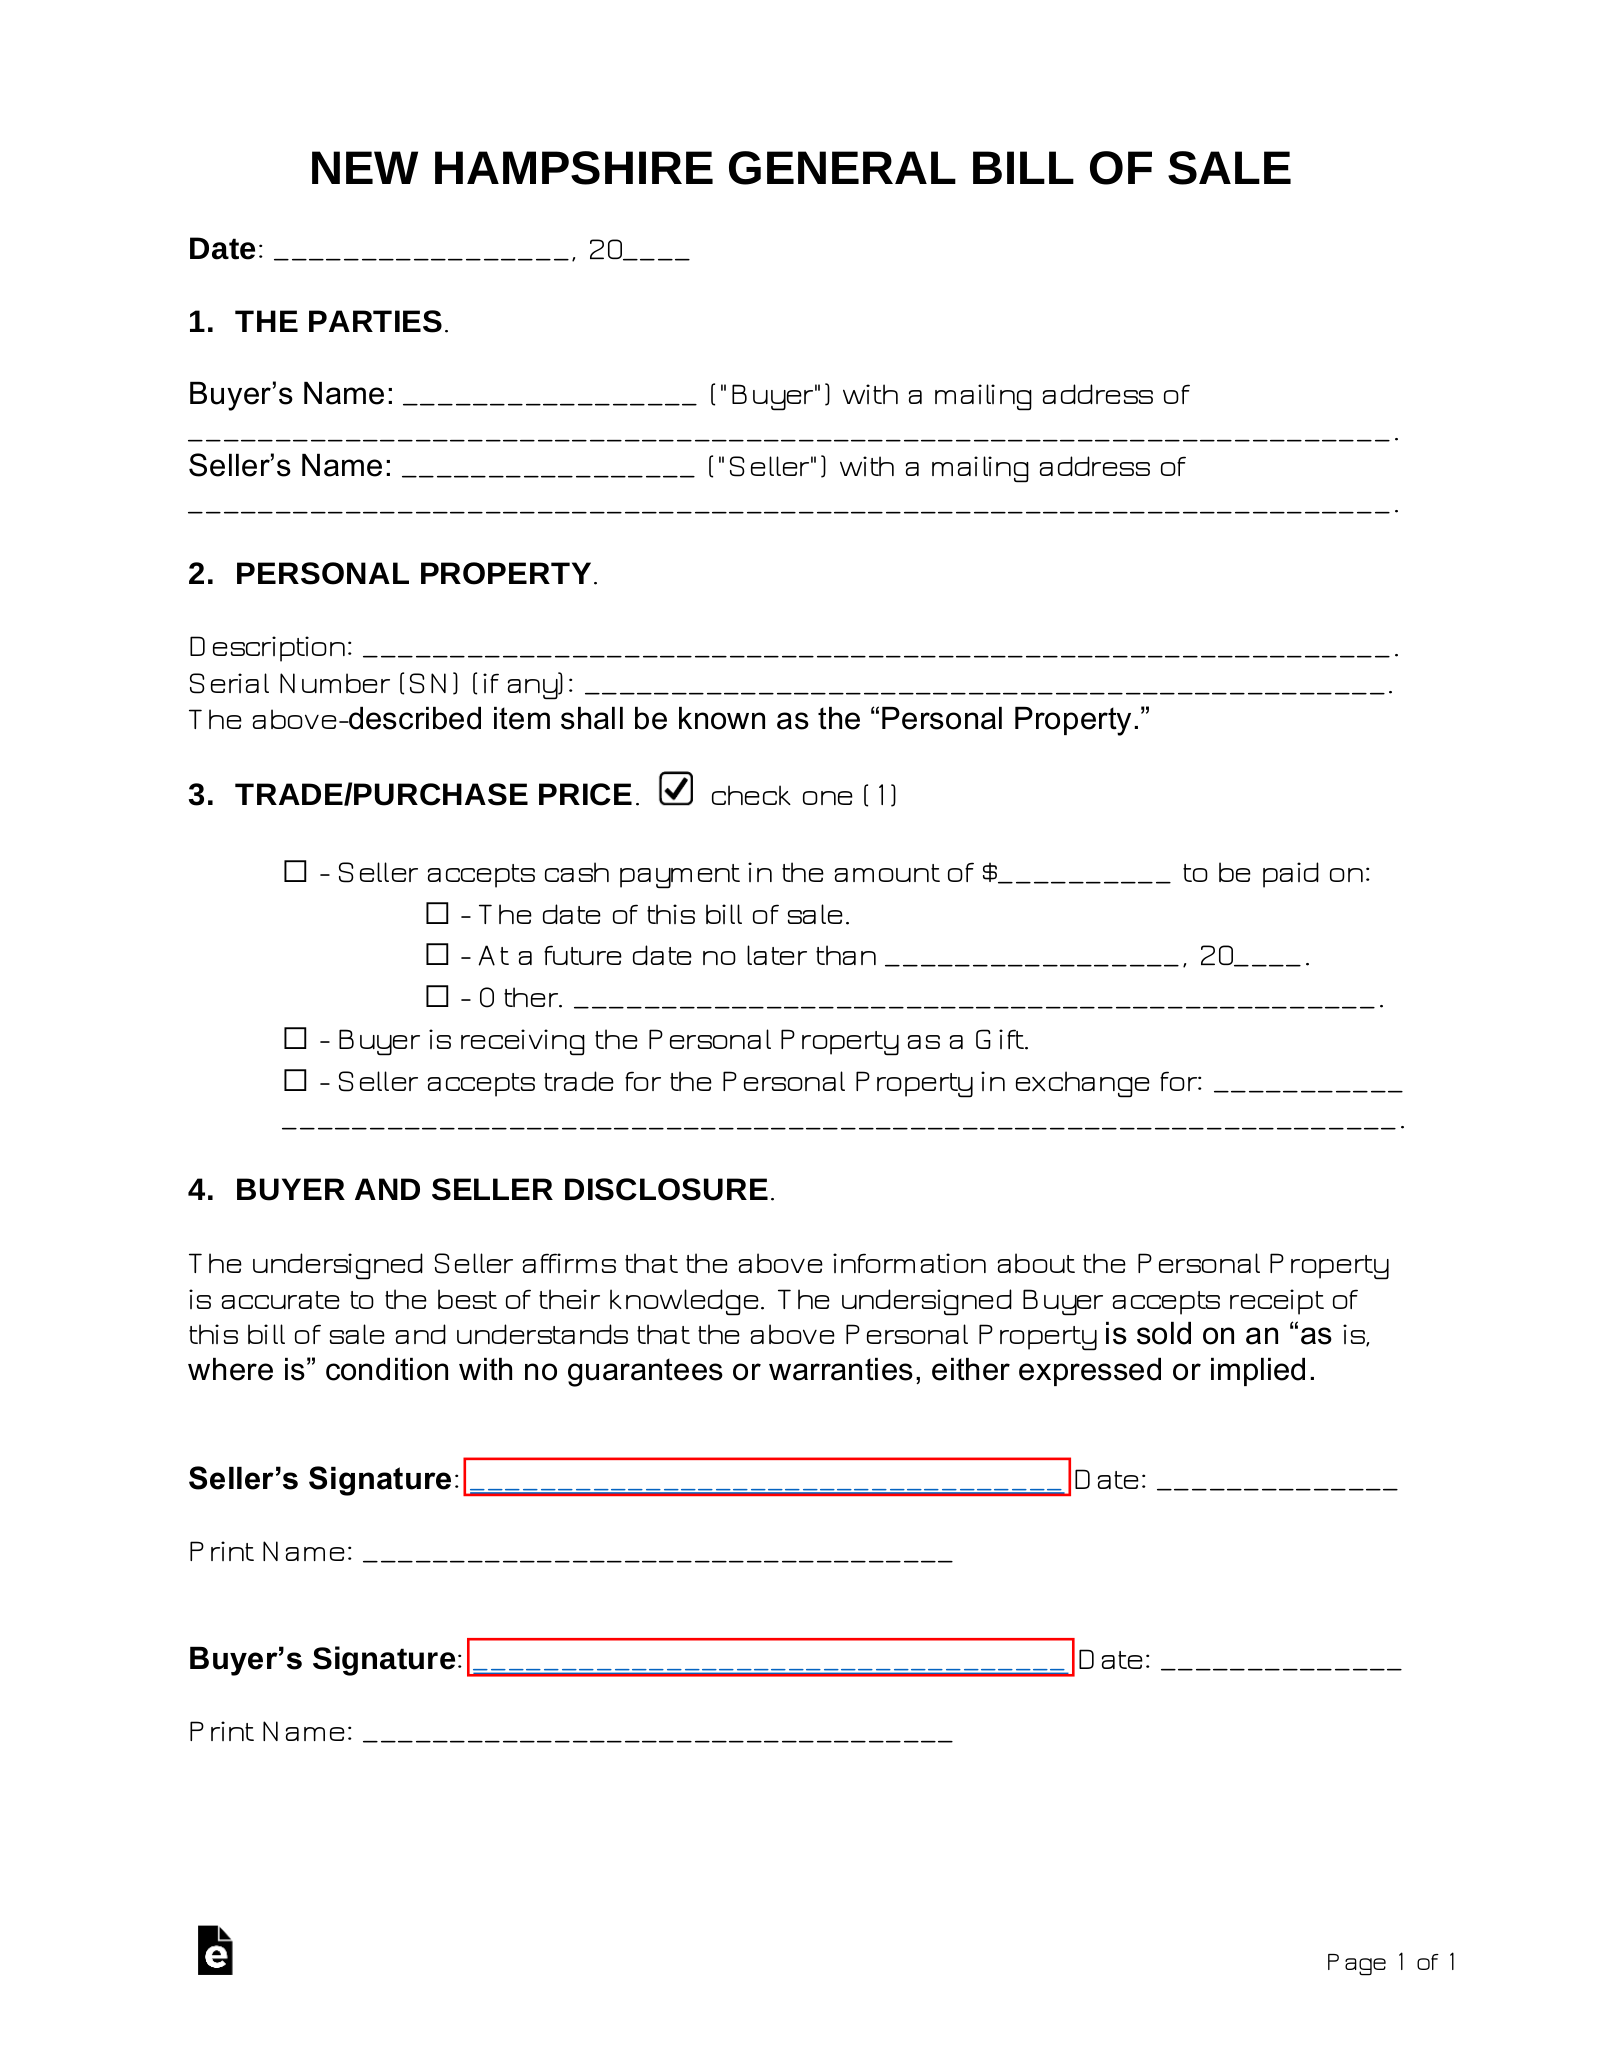 New Hampshire General Bill of Sale Form